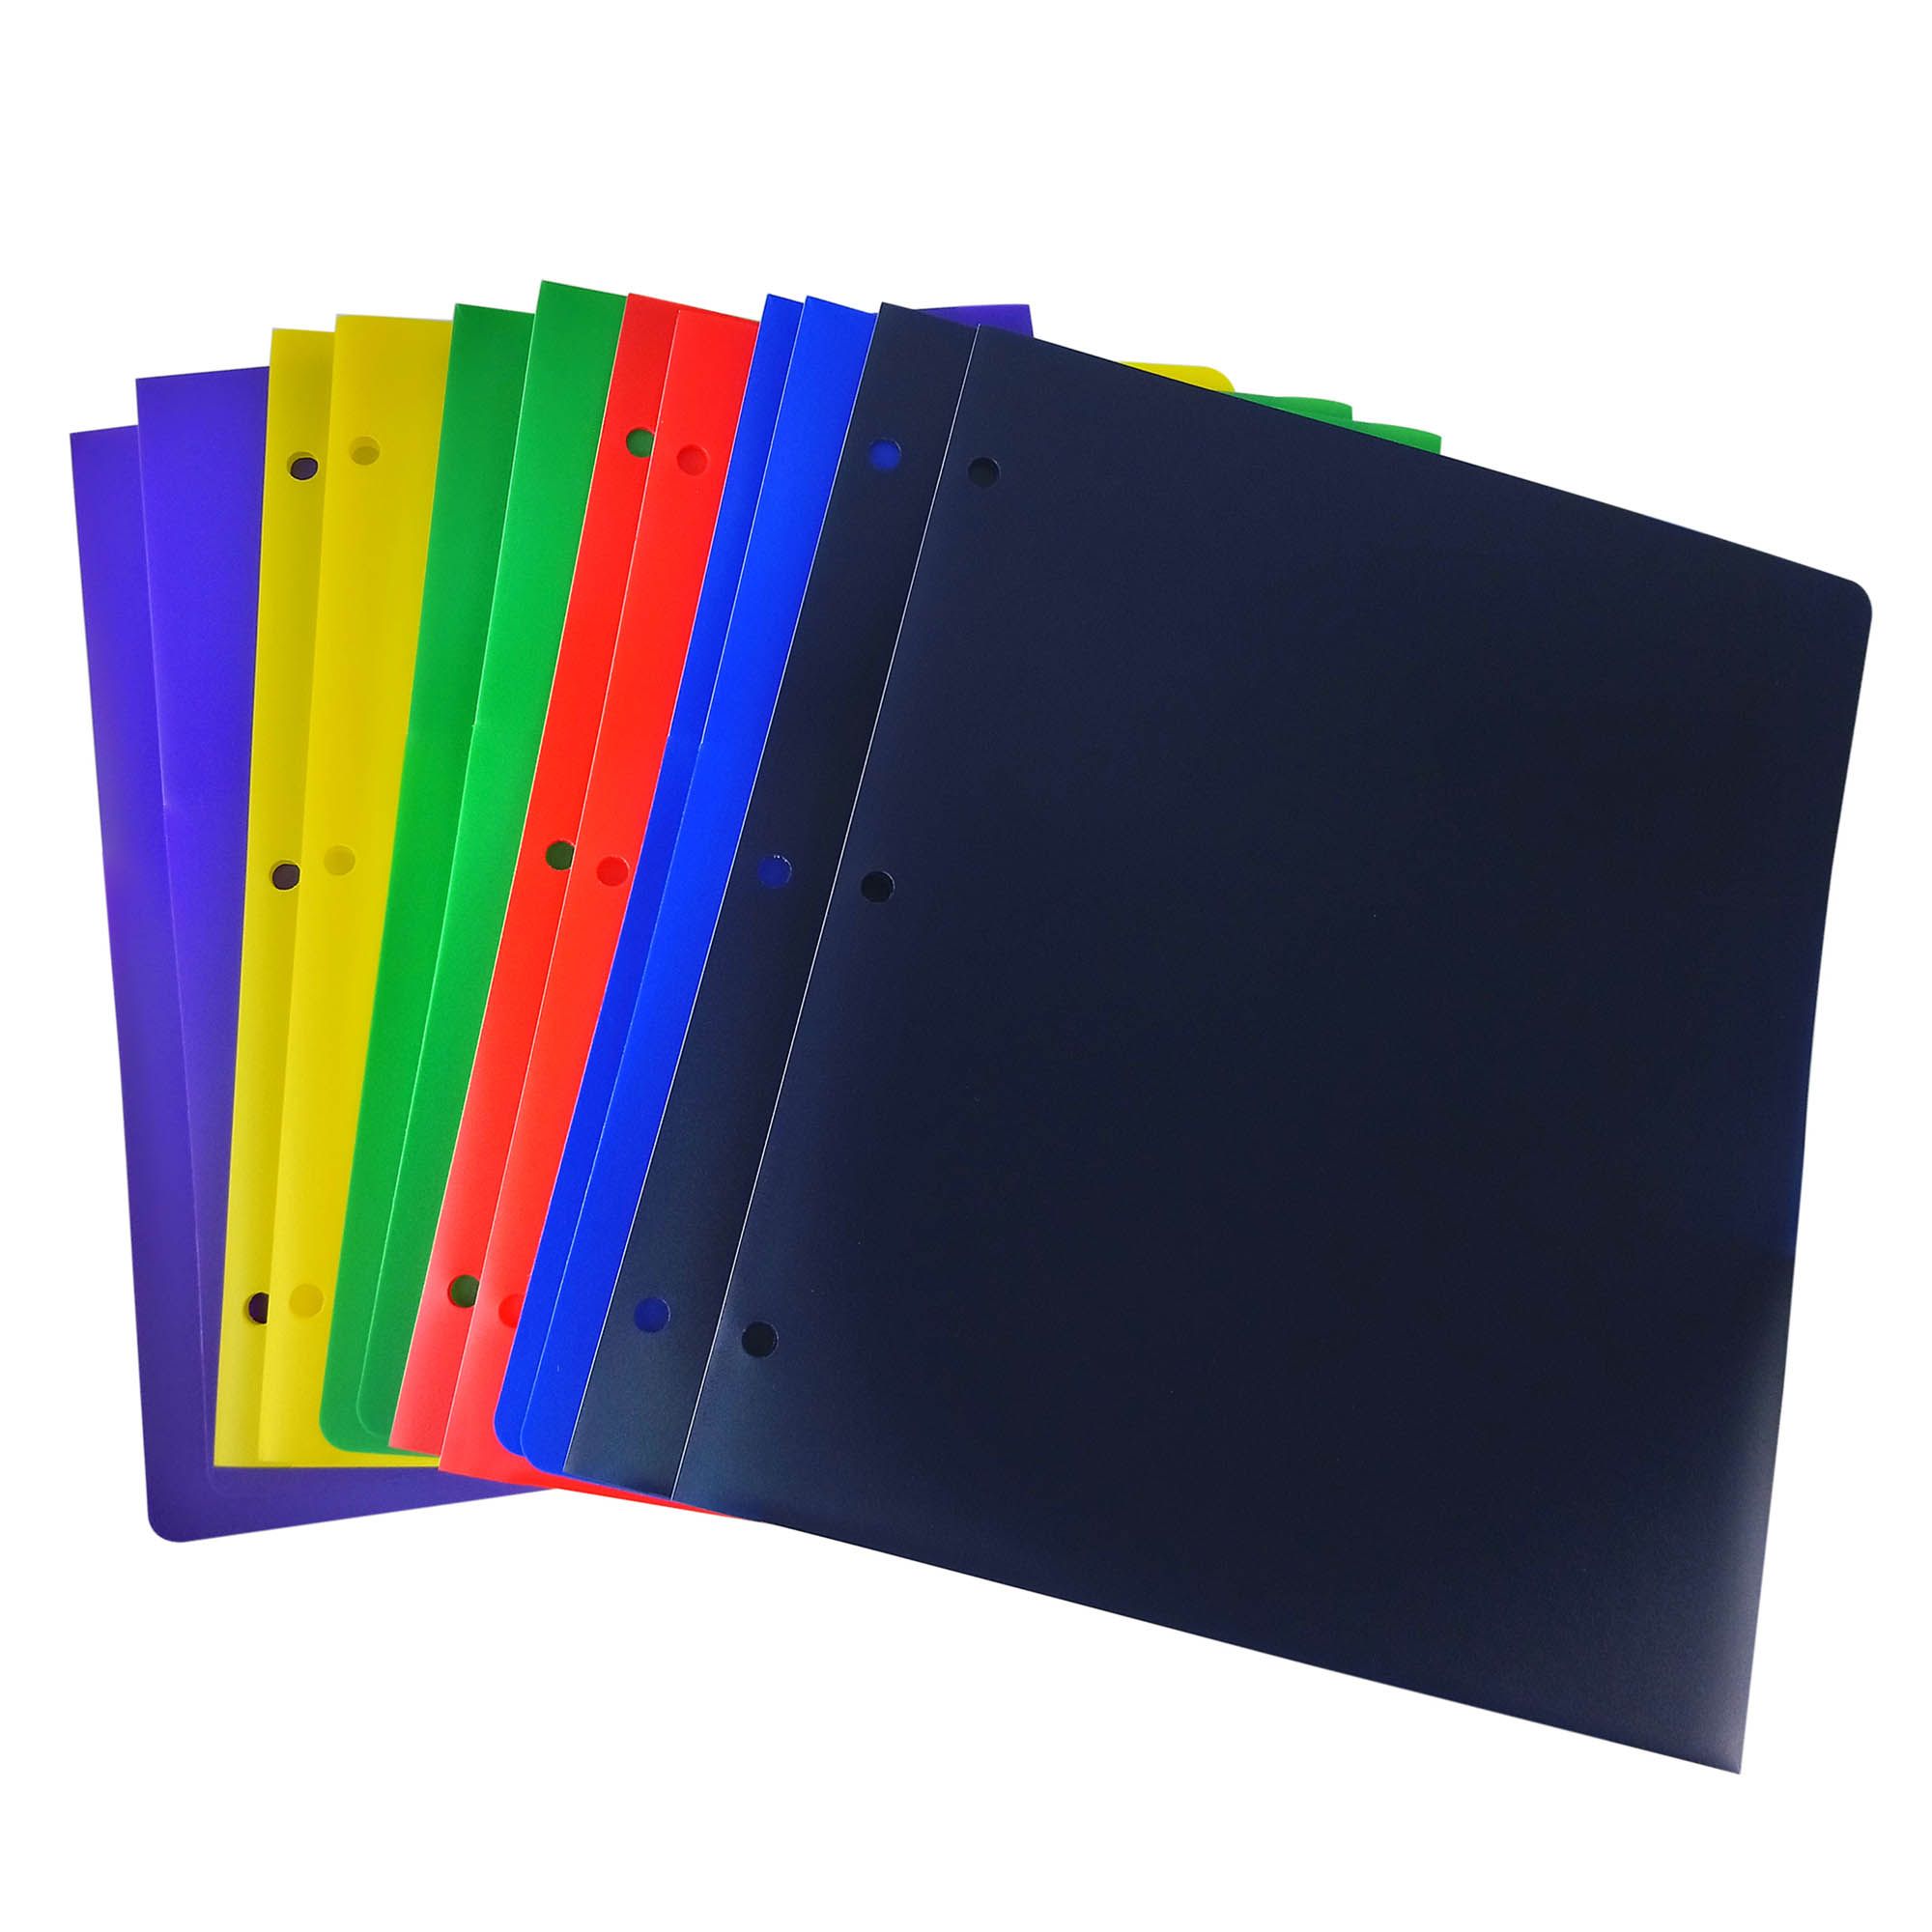 Better Office Products Black Plastic 2 Pocket Folders with Prongs